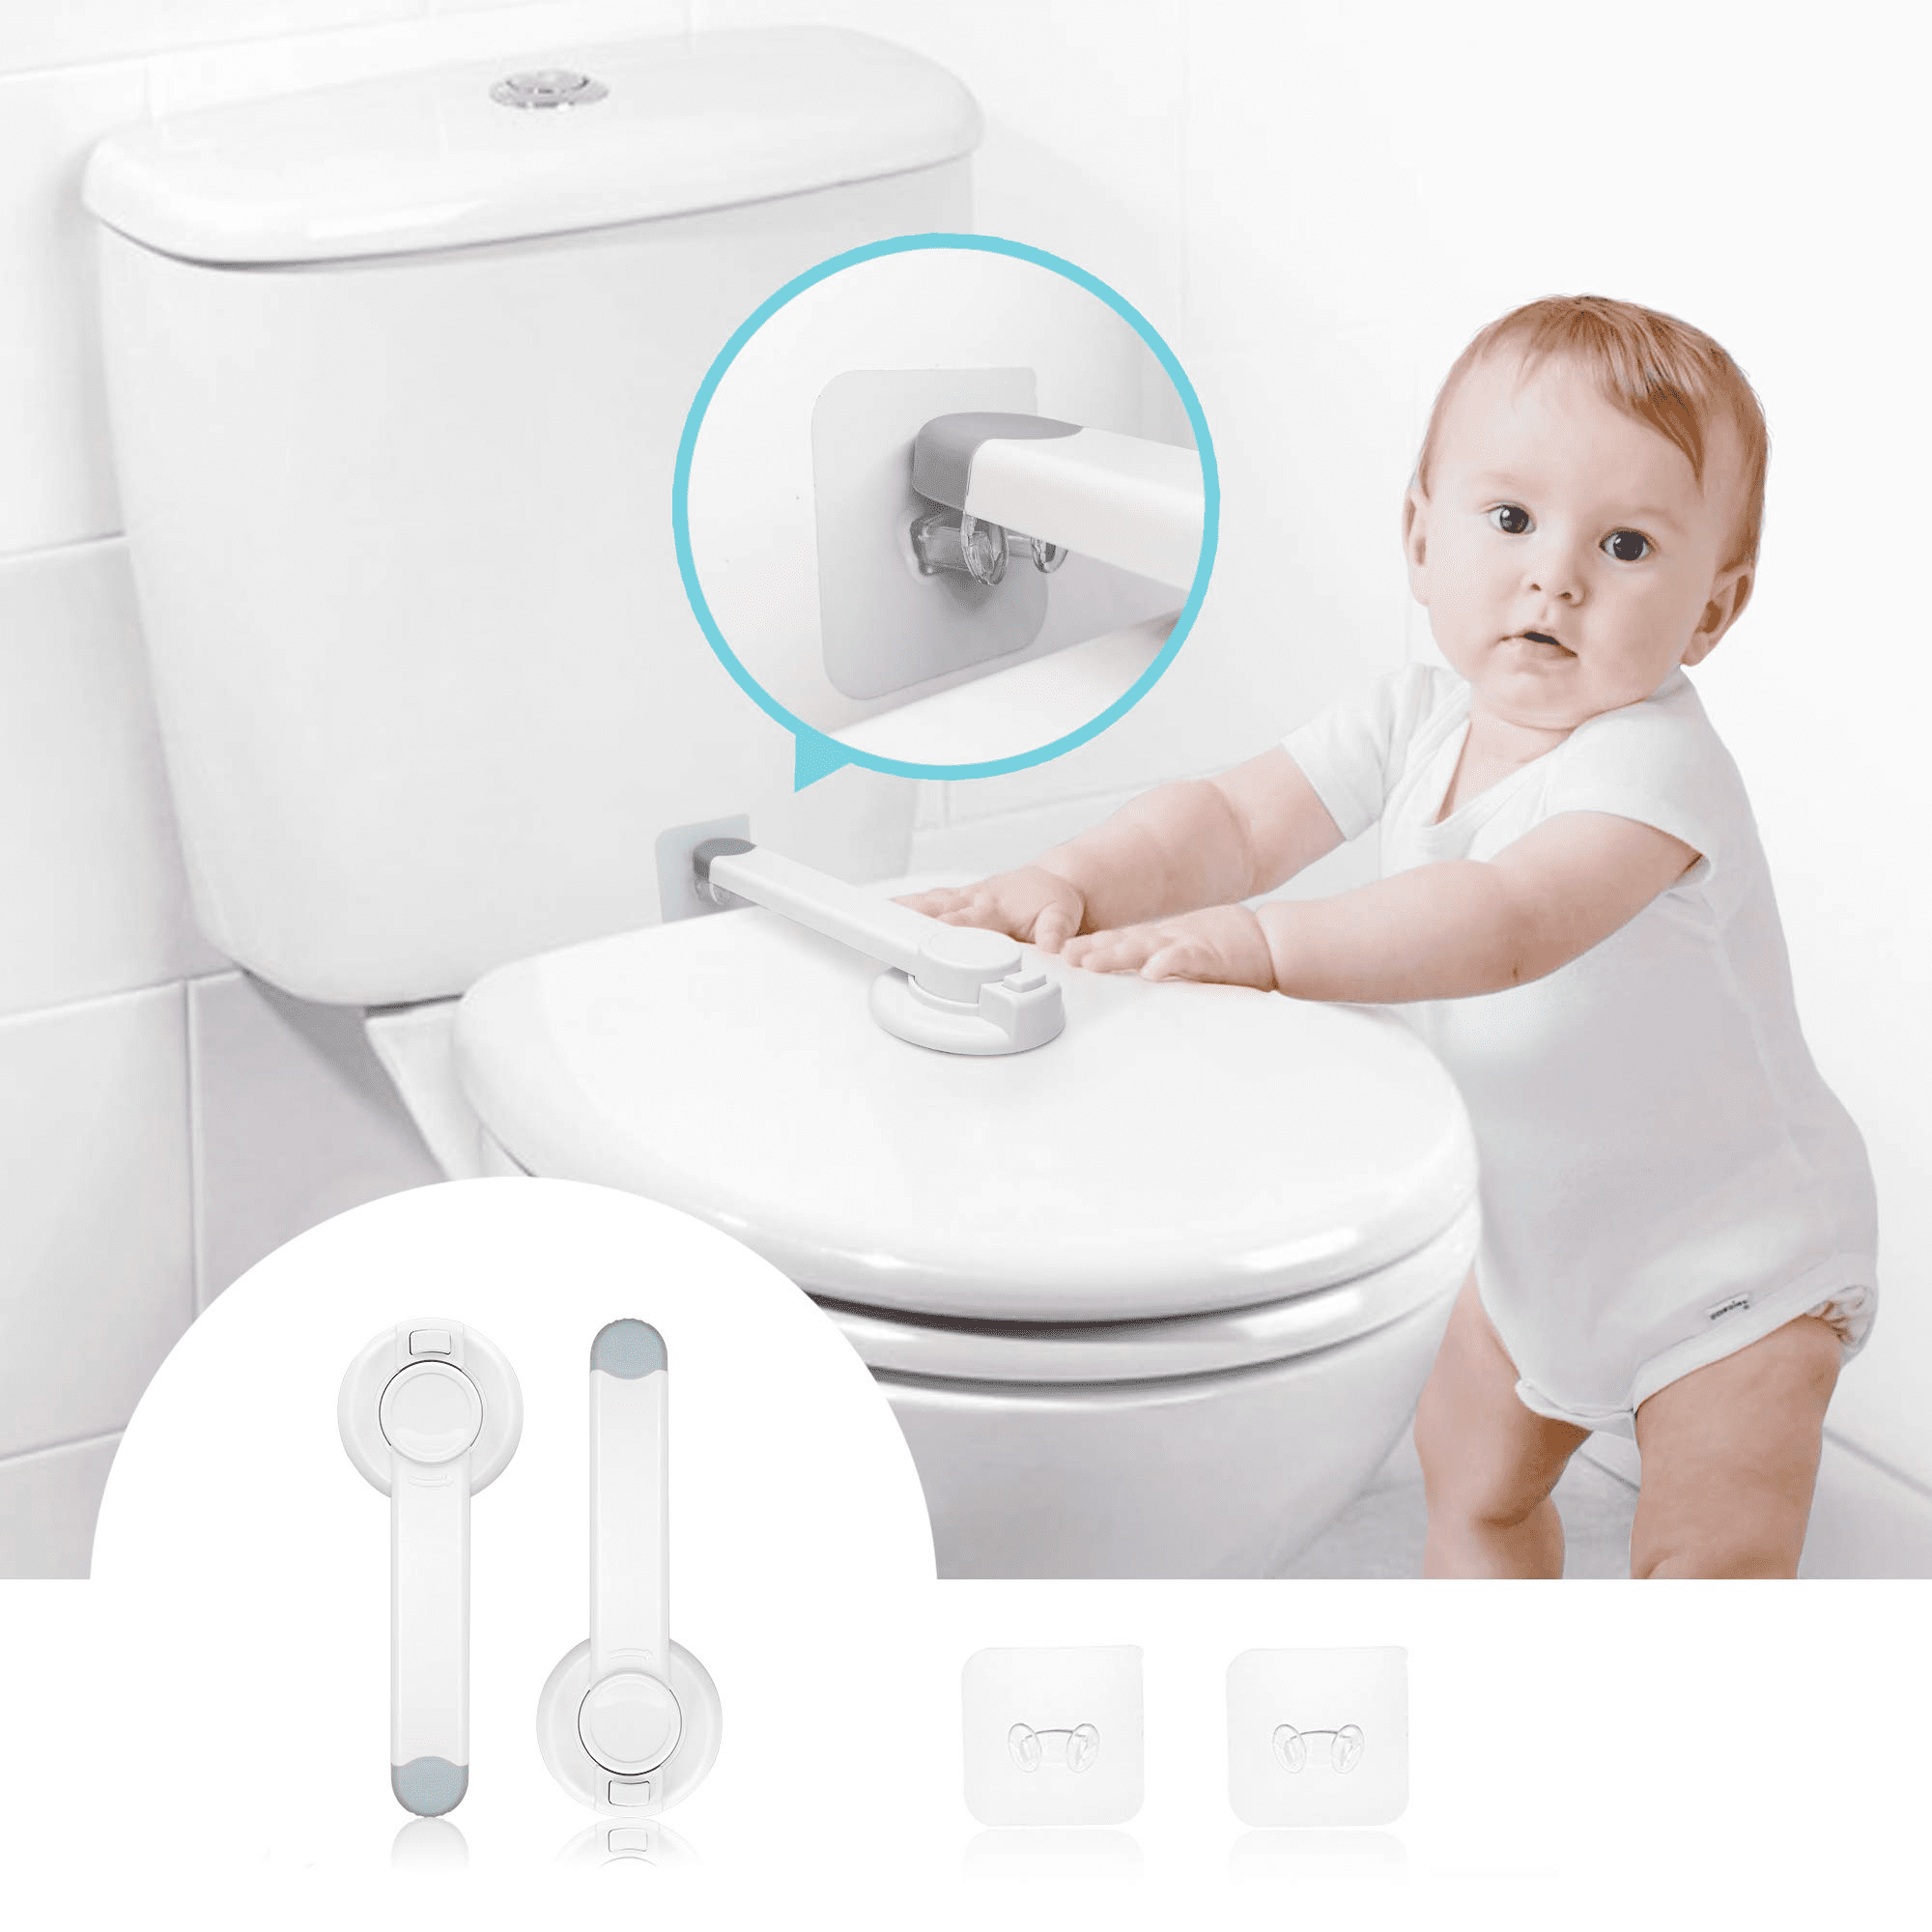 Toilet Locks Baby Proof Child Toddlers, [2 Packs] Sturdy Safety Toilet Lid  Seat Proofer Lock for Kids Pets Dog, Easy Installation and Fit Most Toilets